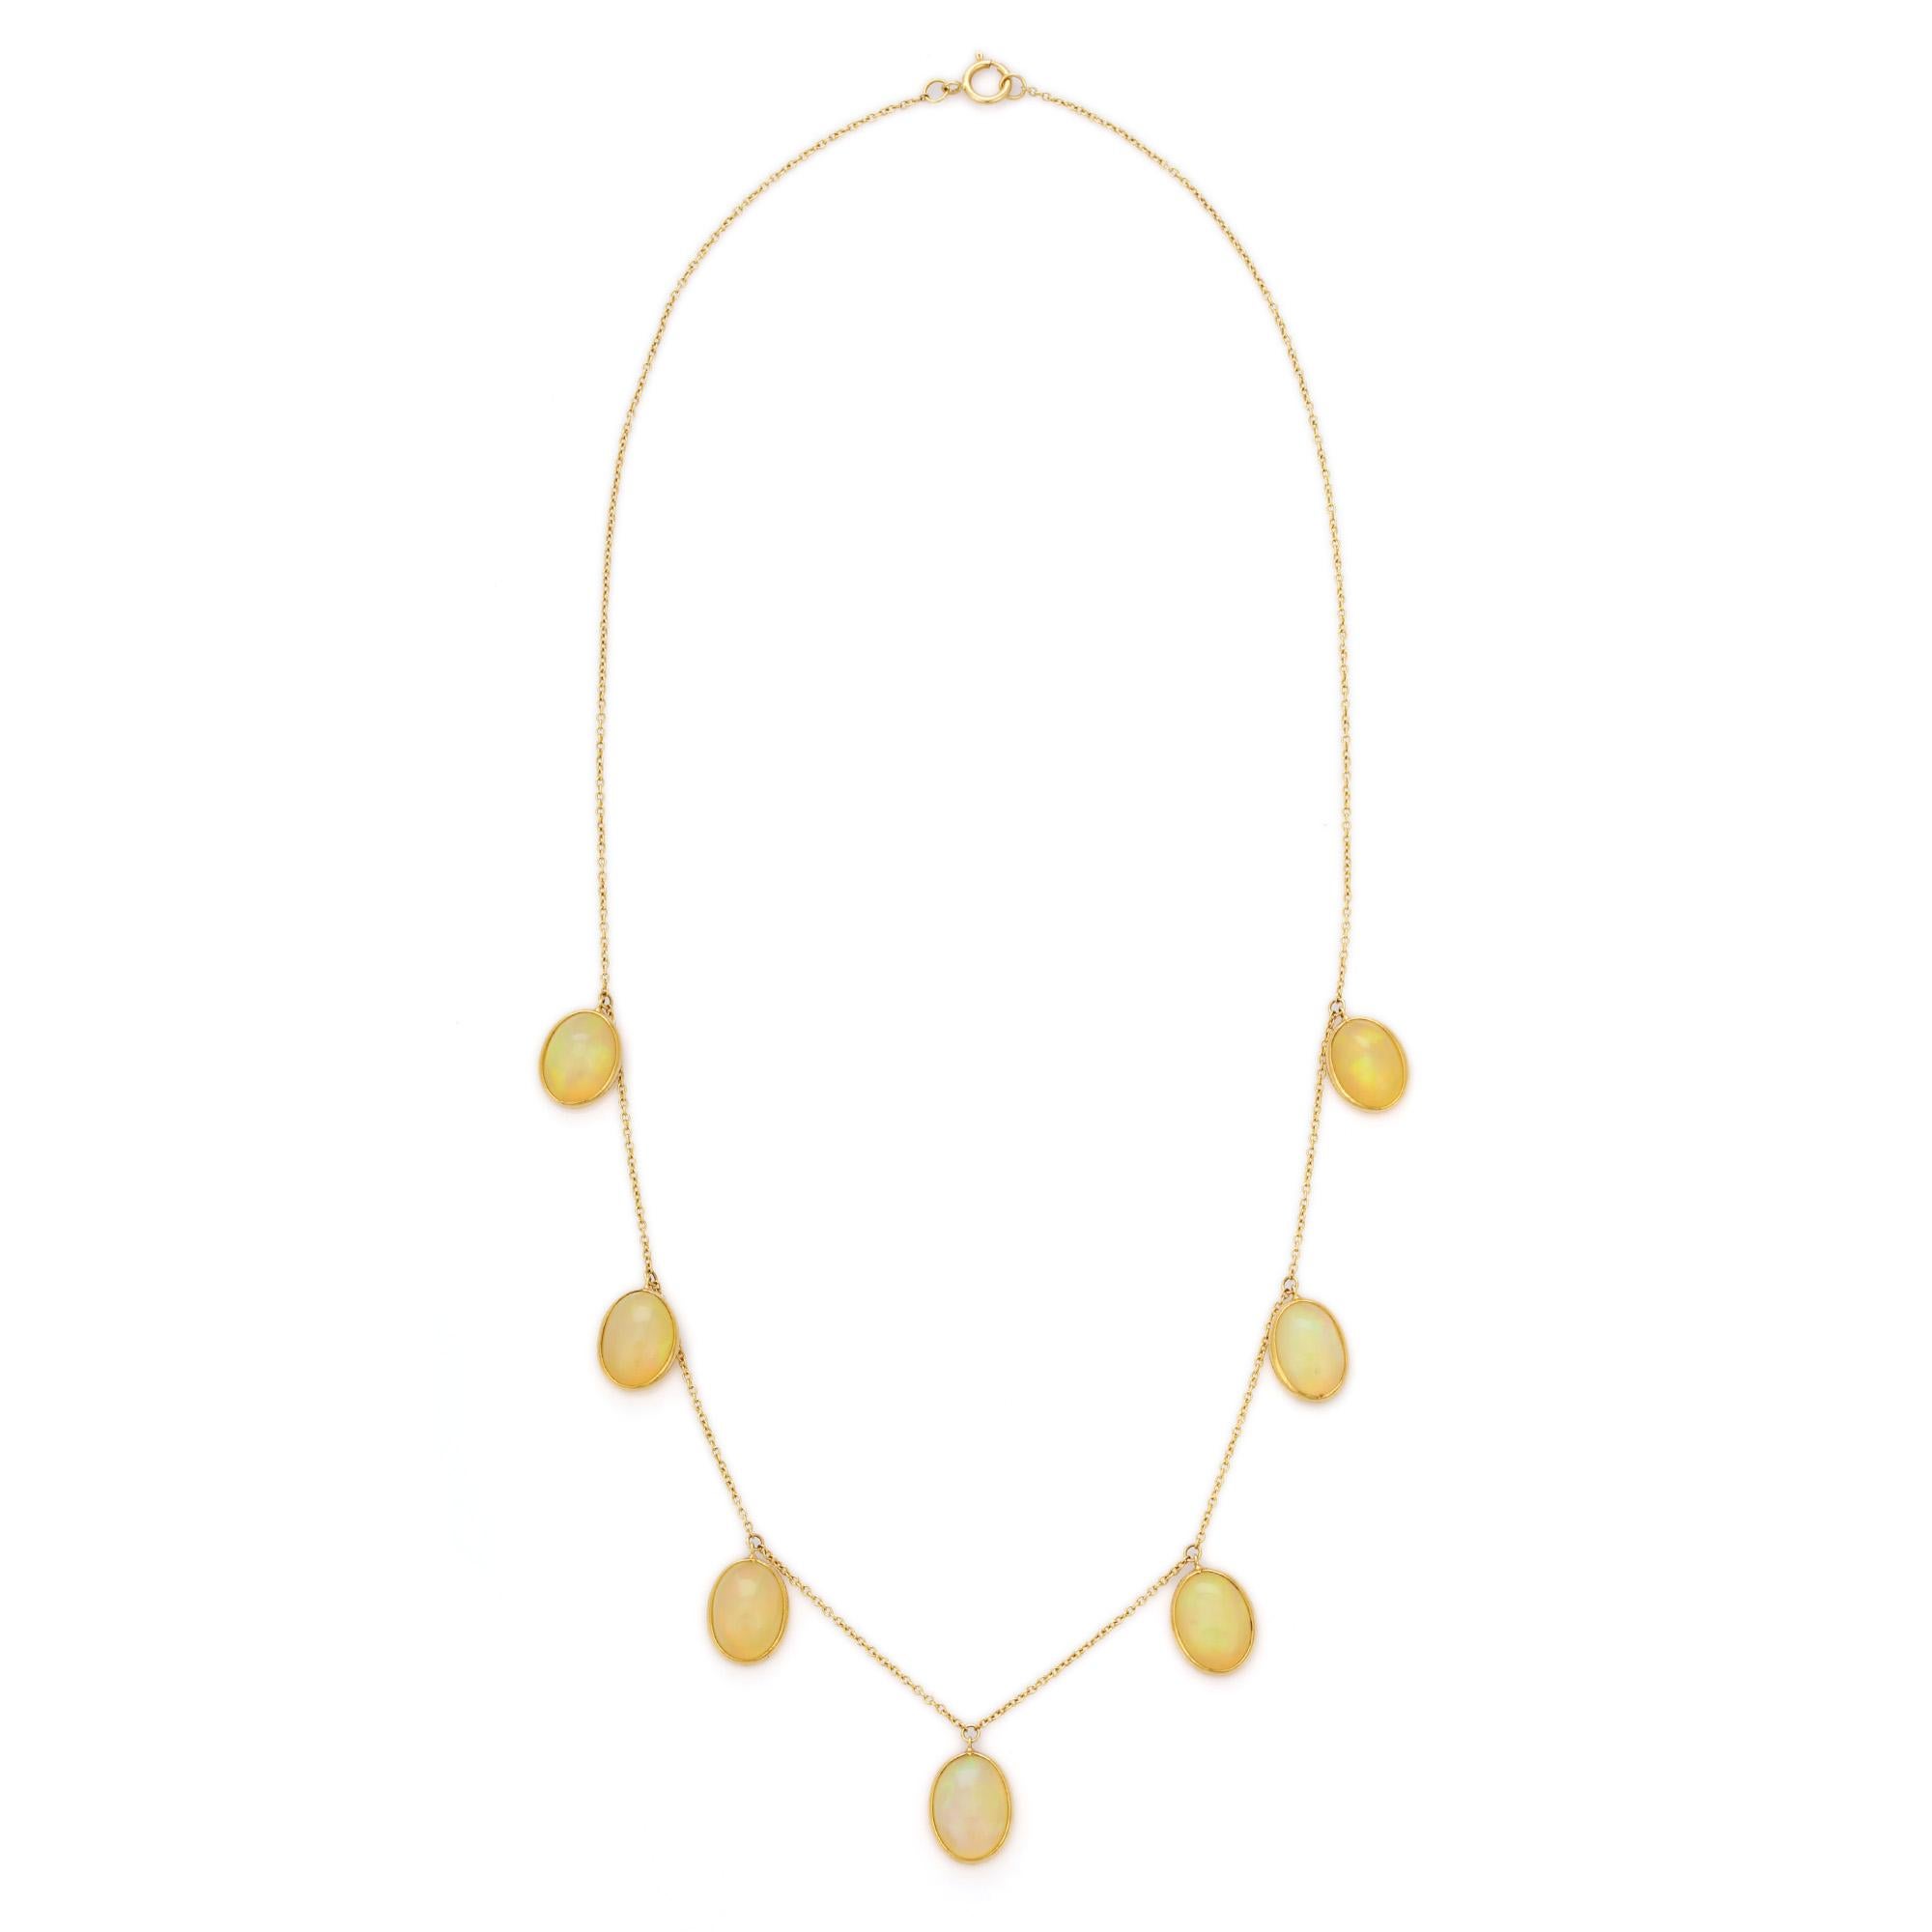 Opal Charm Necklace in 18K Gold studded with oval cut opal.
Accessorize your look with this elegant opal charm necklace. This stunning piece of jewelry instantly elevates a casual look or dressy outfit. Comfortable and easy to wear, it is just as